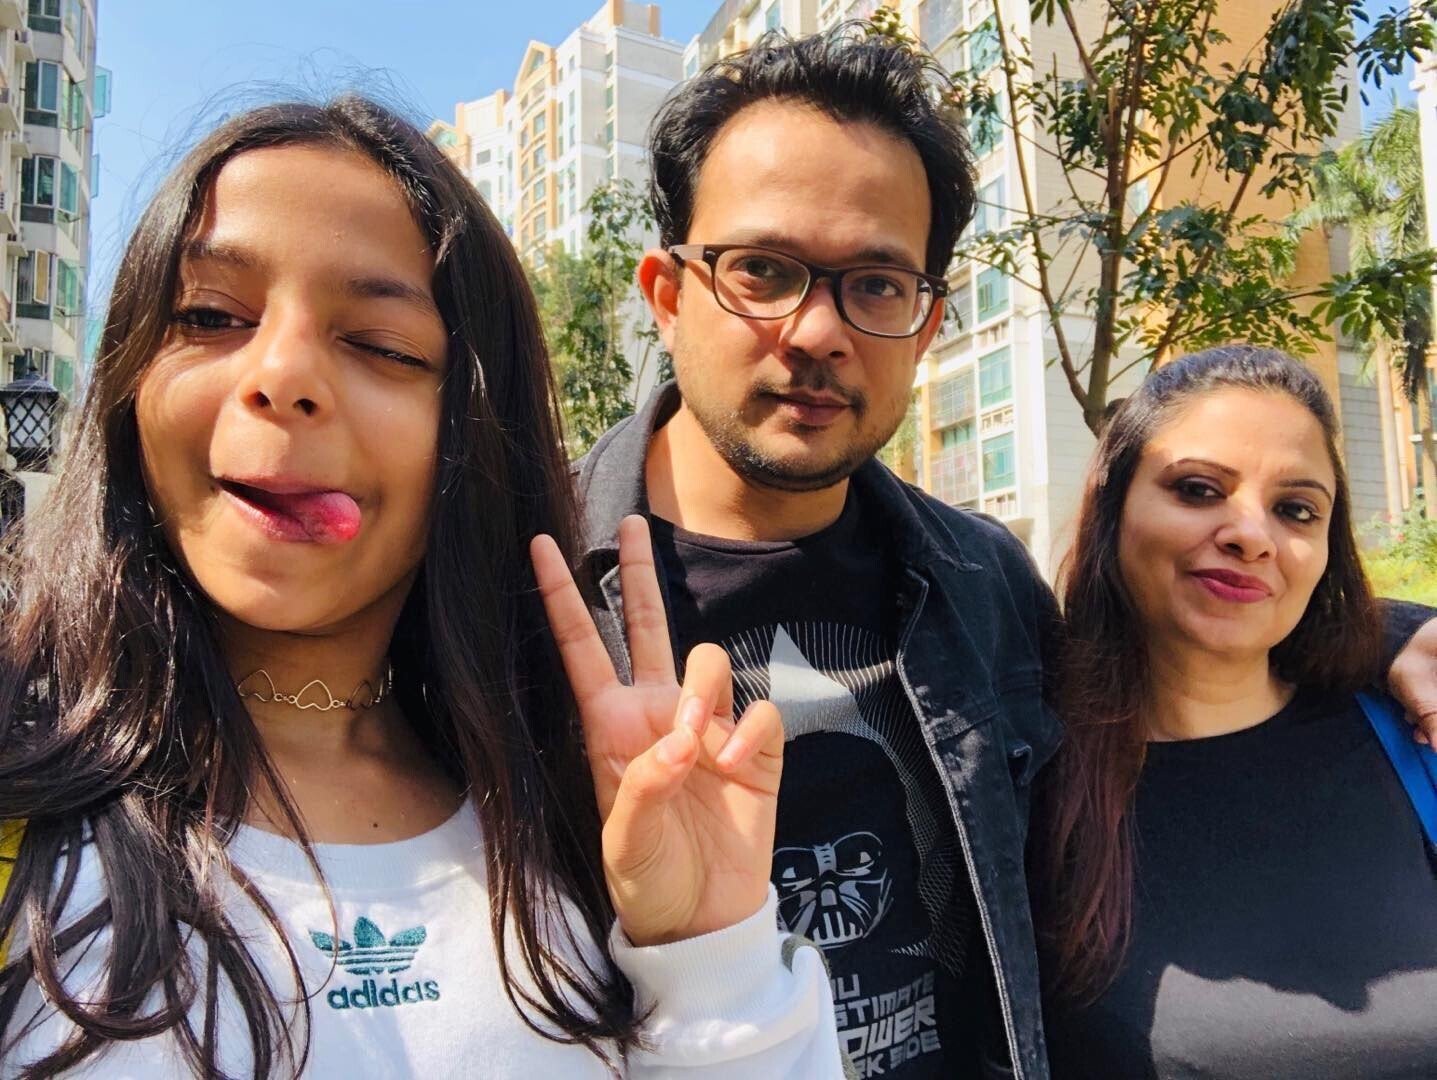 Mischka, Mehul and Dipika Kantharia (left to right) at their apartment complex in Shenzhen, China. Photo: Handout